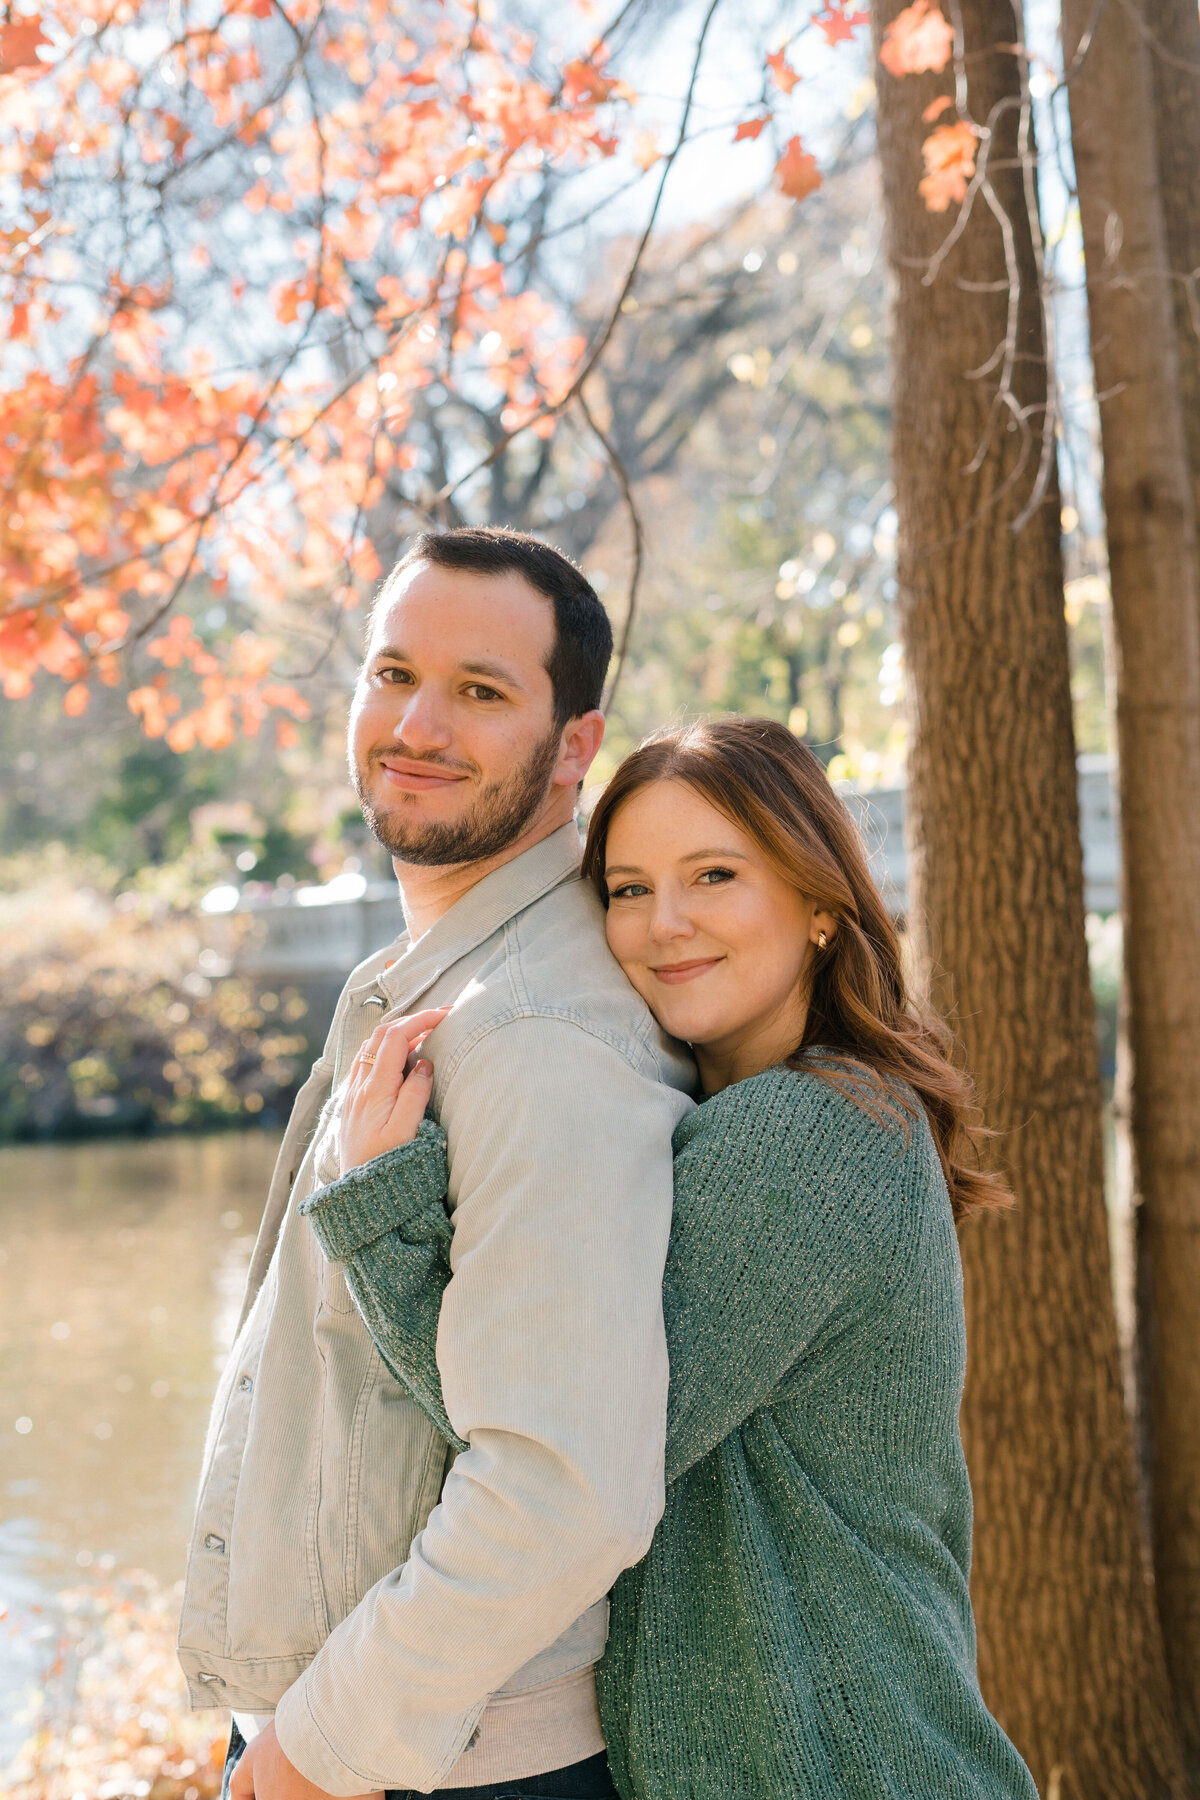 woman wrapping arms around man from behind while they smile